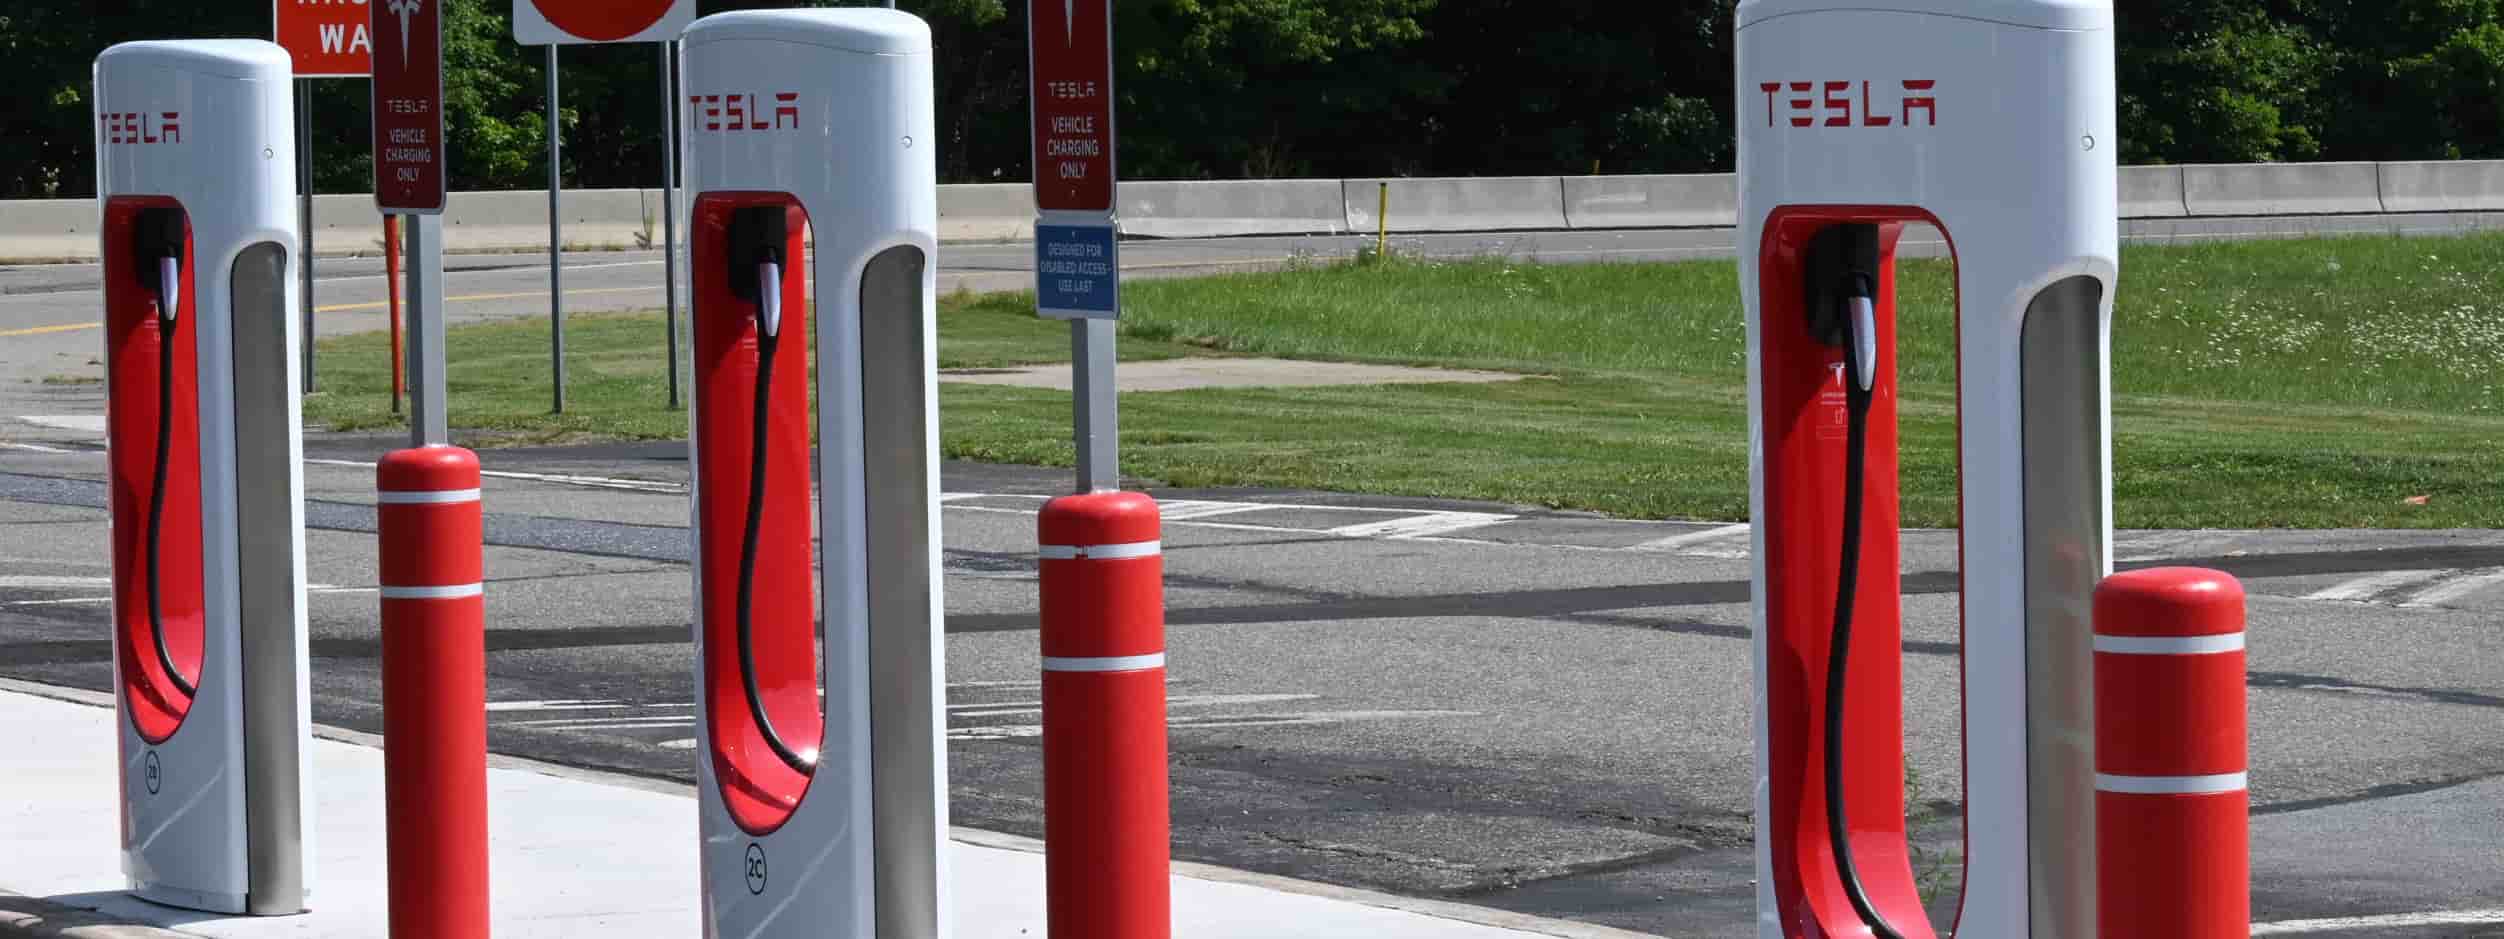 A line of Tesla Superchargers await EV drivers who need to recharge their vehicles.